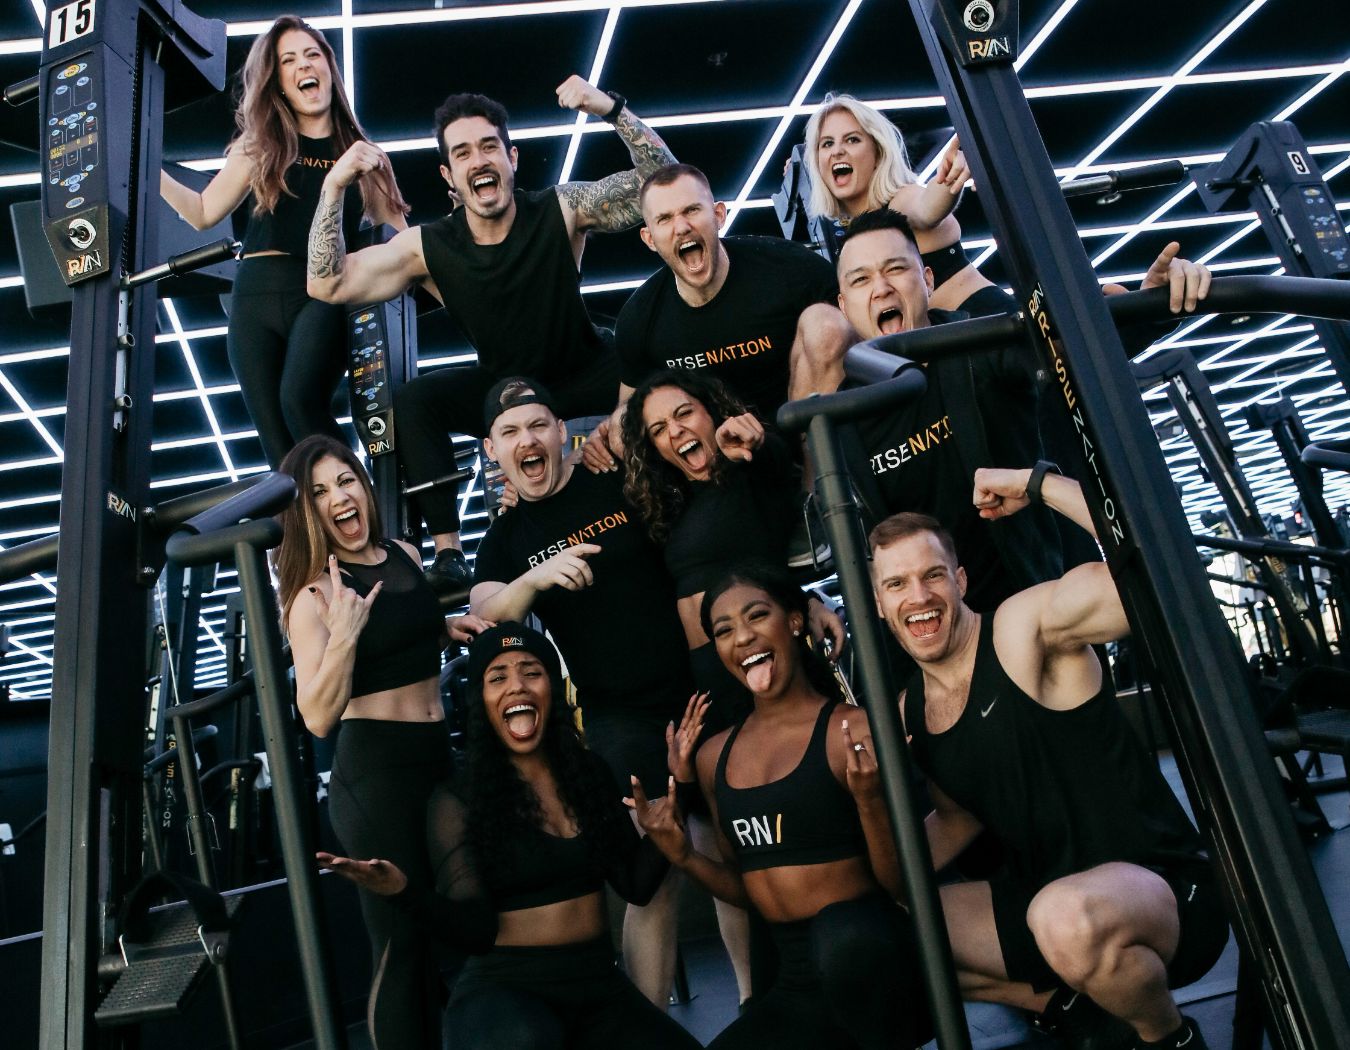 Let's Climb: Rise Nation — Fit + Finesse, rise nation nyc 